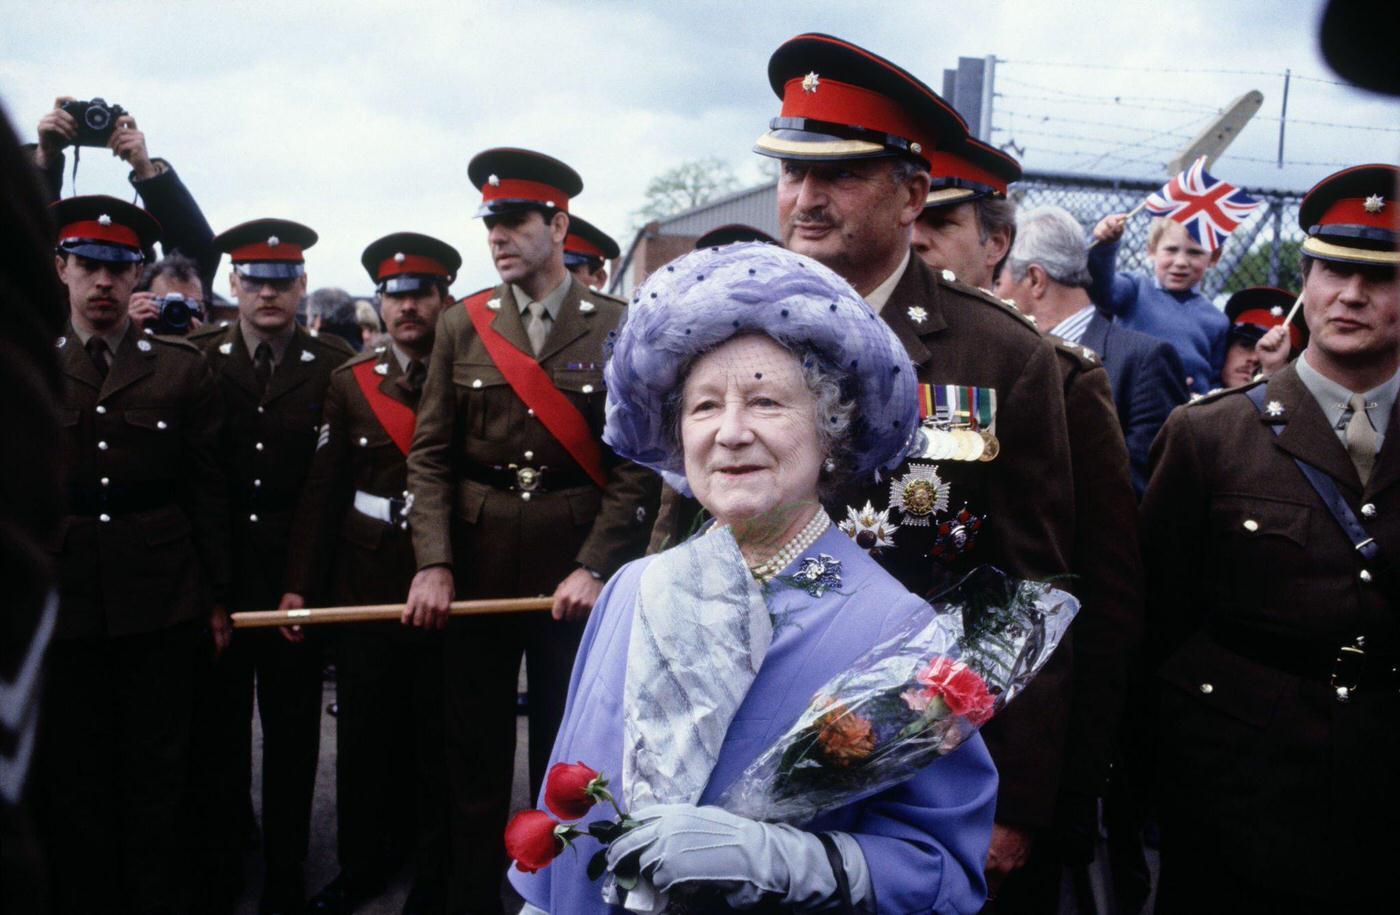 The Queen Mother visiting the Royal Anglian Regiment at Hyderabad barracks in Colchester, England, 1983.